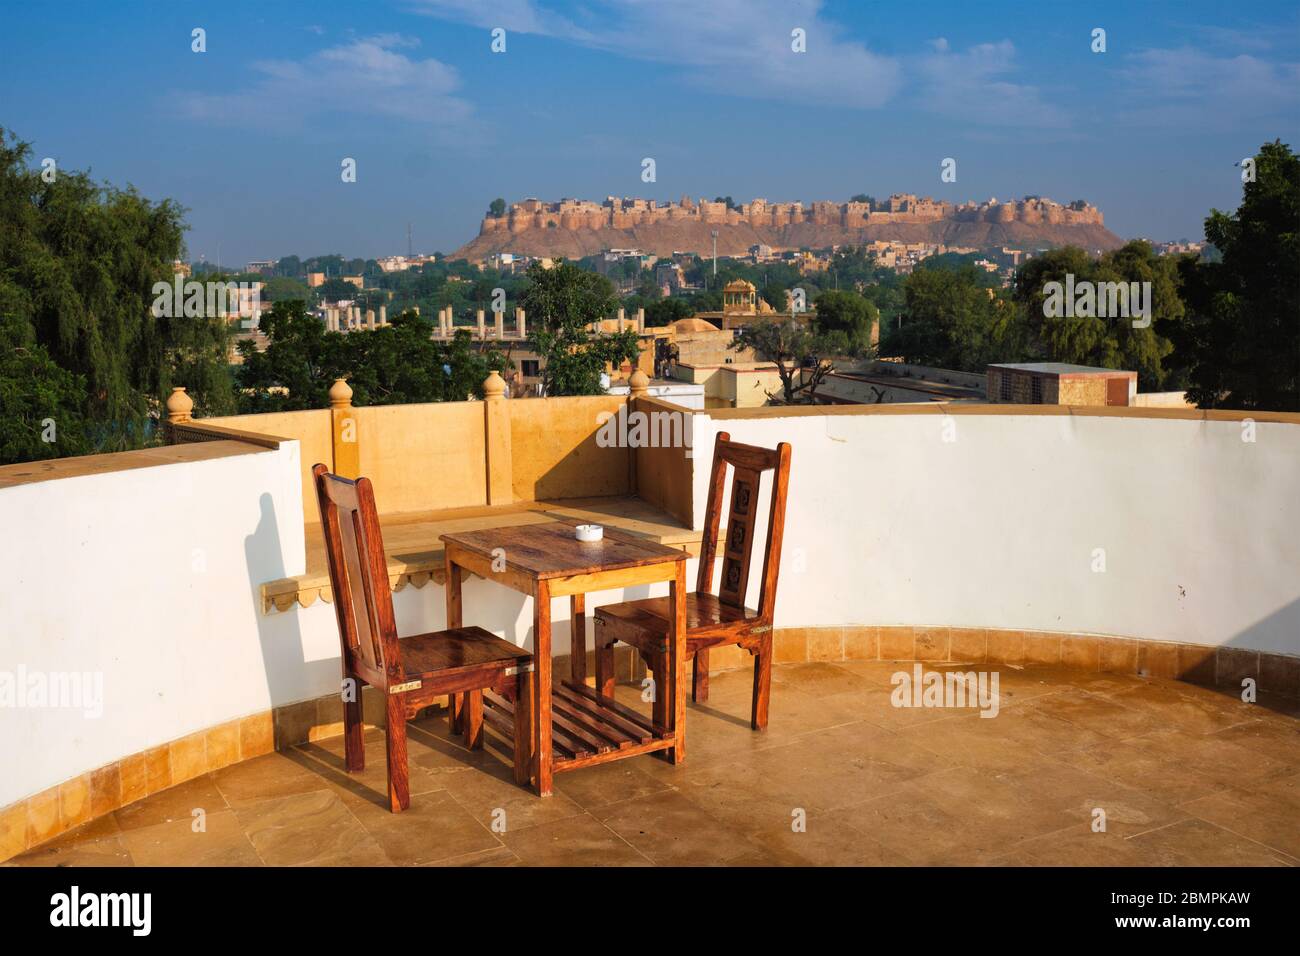 Jaisalmer Fort known as the 'Golden Fort'. Local name is 'Sonar quila' Stock Photo